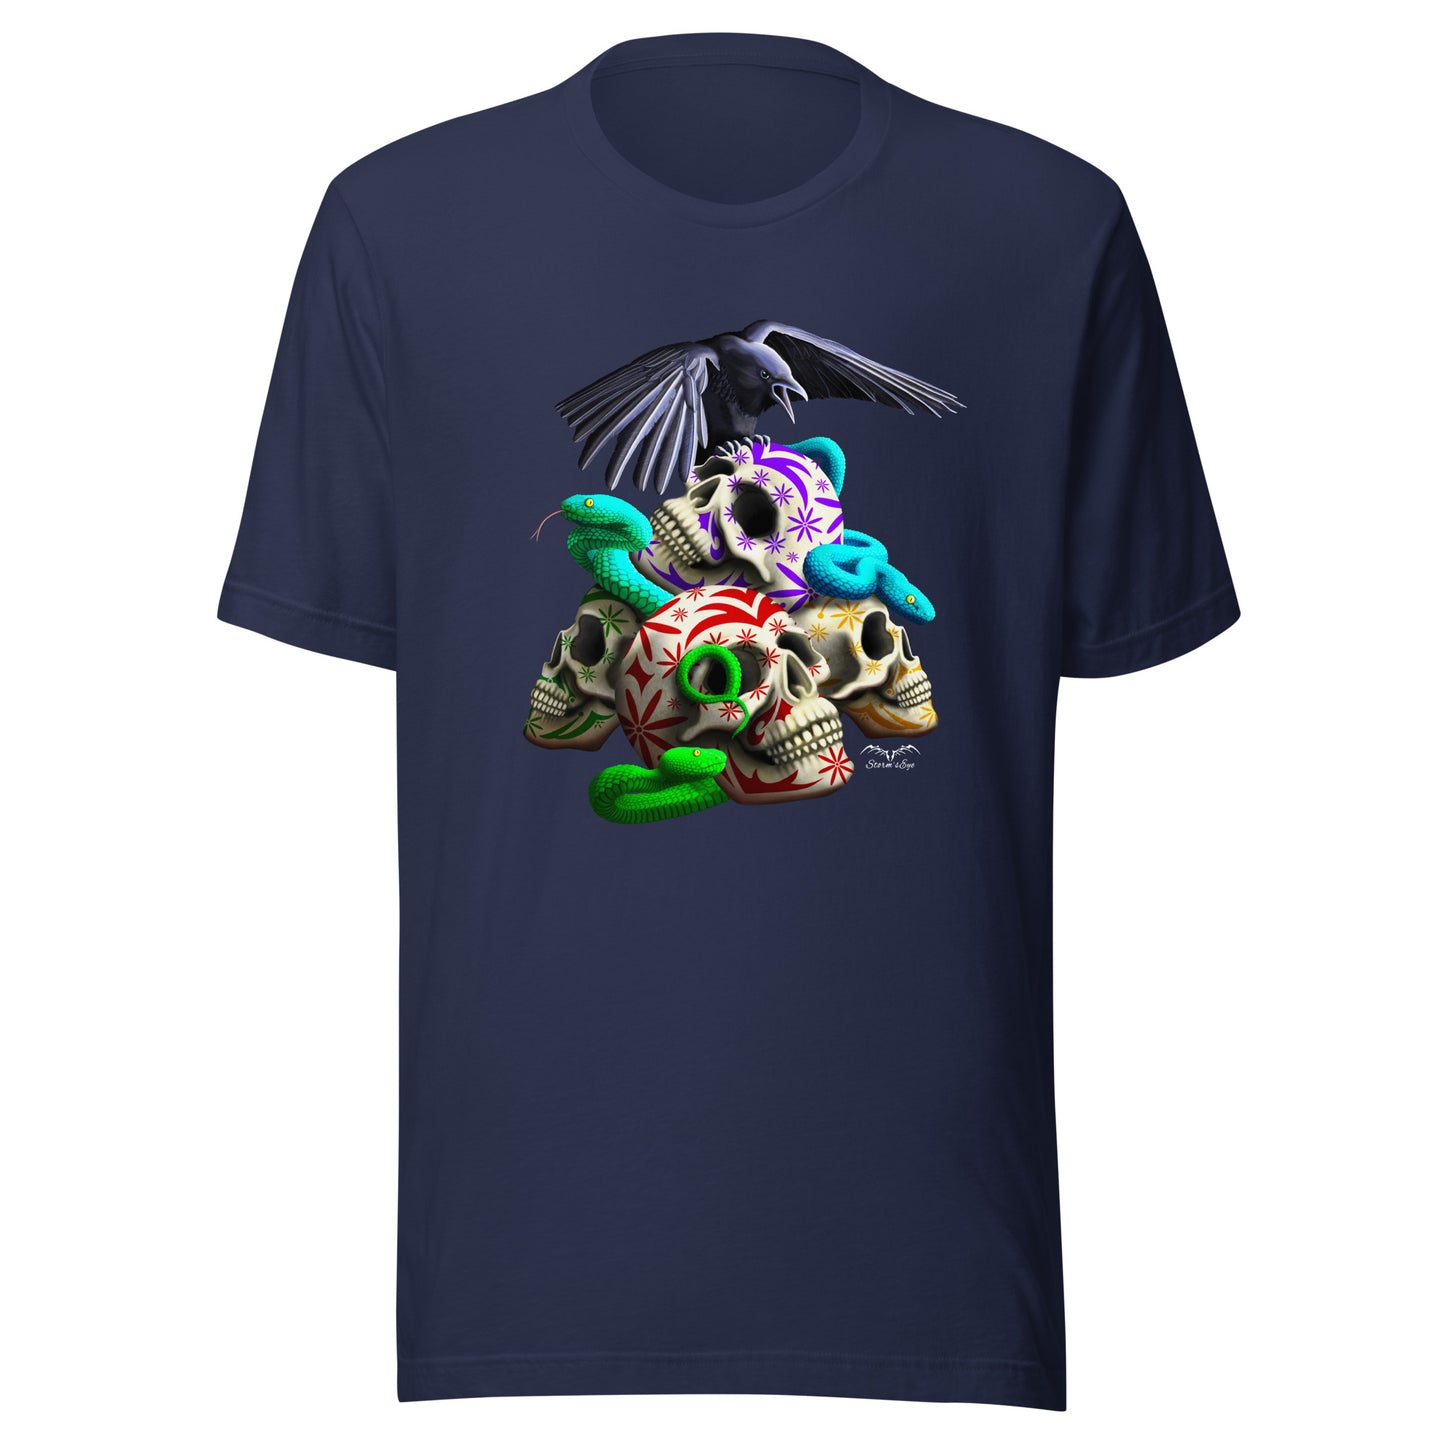 stormseye design gothic sugar skulls and snakes T shirt flat view navy blue